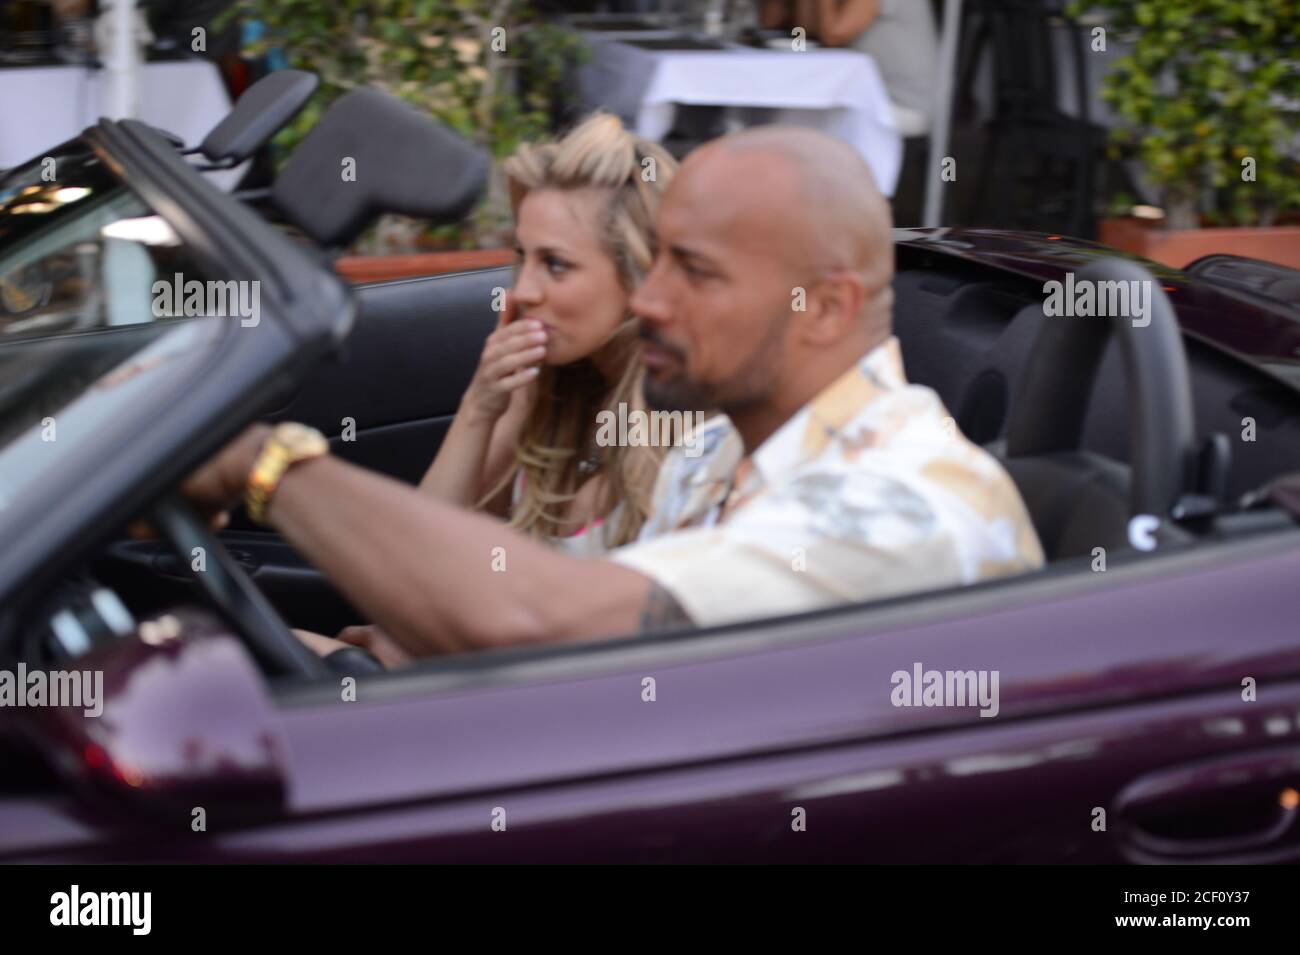 MIAMI BEACH, FL - APRIL 25: (EXCLUSIVE COVERAGE) Israli super-model Bar Paly and Dwayne 'The Rock' Johnson film a scene together in a purple Chrysler Prowler, on the set of Pain and Gain which is directed by Michael Bay. Pain and Gain is about a pair of bodybuilders in Florida get caught up in an extortion ring and a kidnapping scheme that goes terribly wrong. on April 25, 2012 in Miami Beach, Florida. ( Credit: Storms Media Group/Alamy Live News Stock Photo